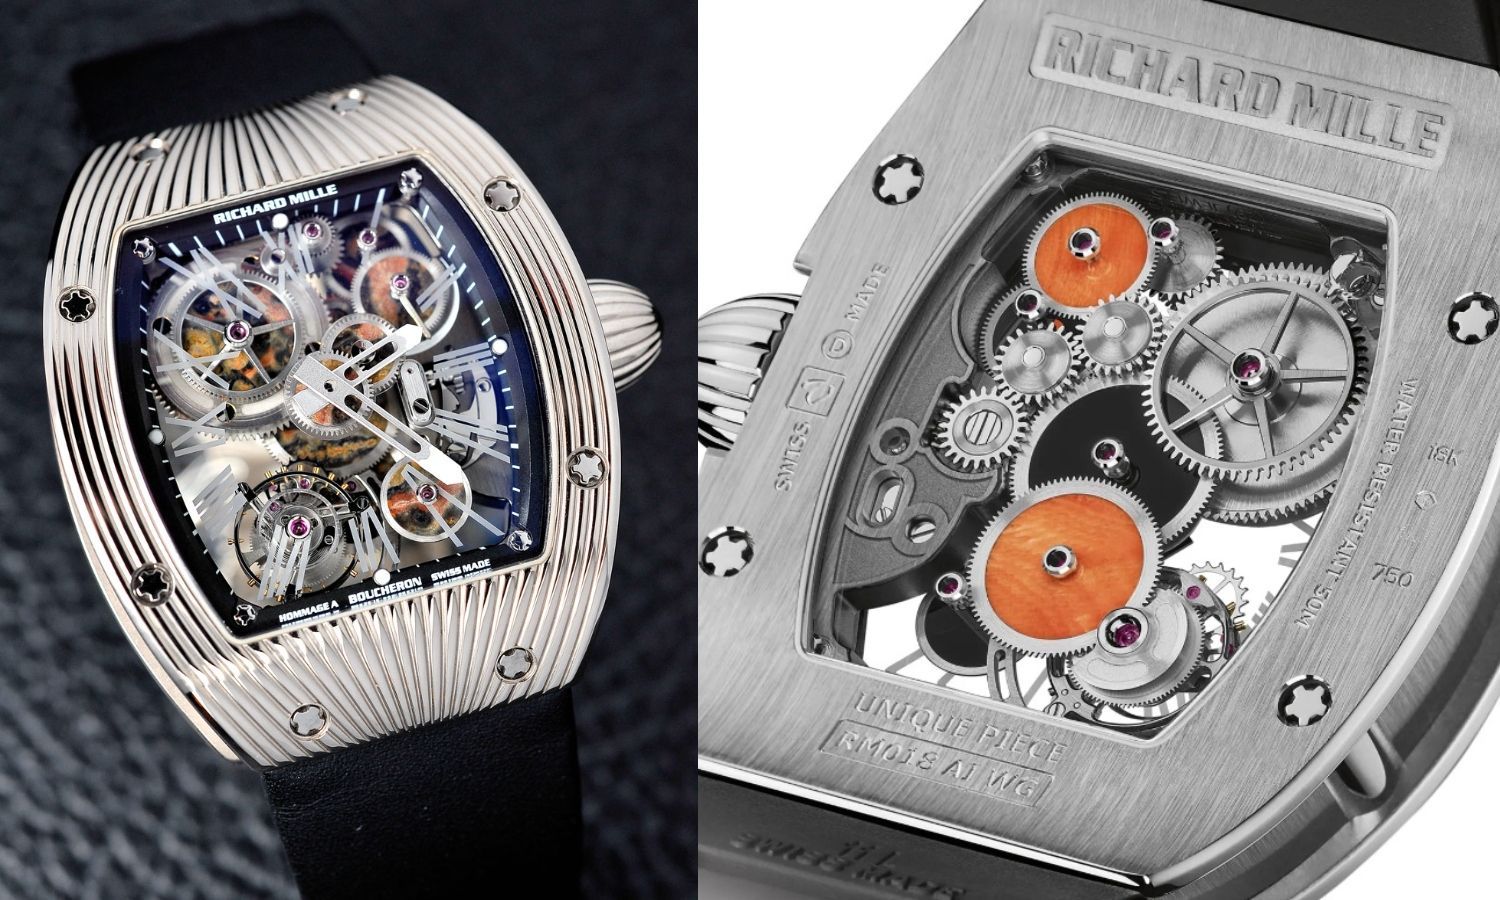 Which Superstar Cyclist Is Winning While Wearing A Rare Richard Mille Watch  at Le Tour de France?